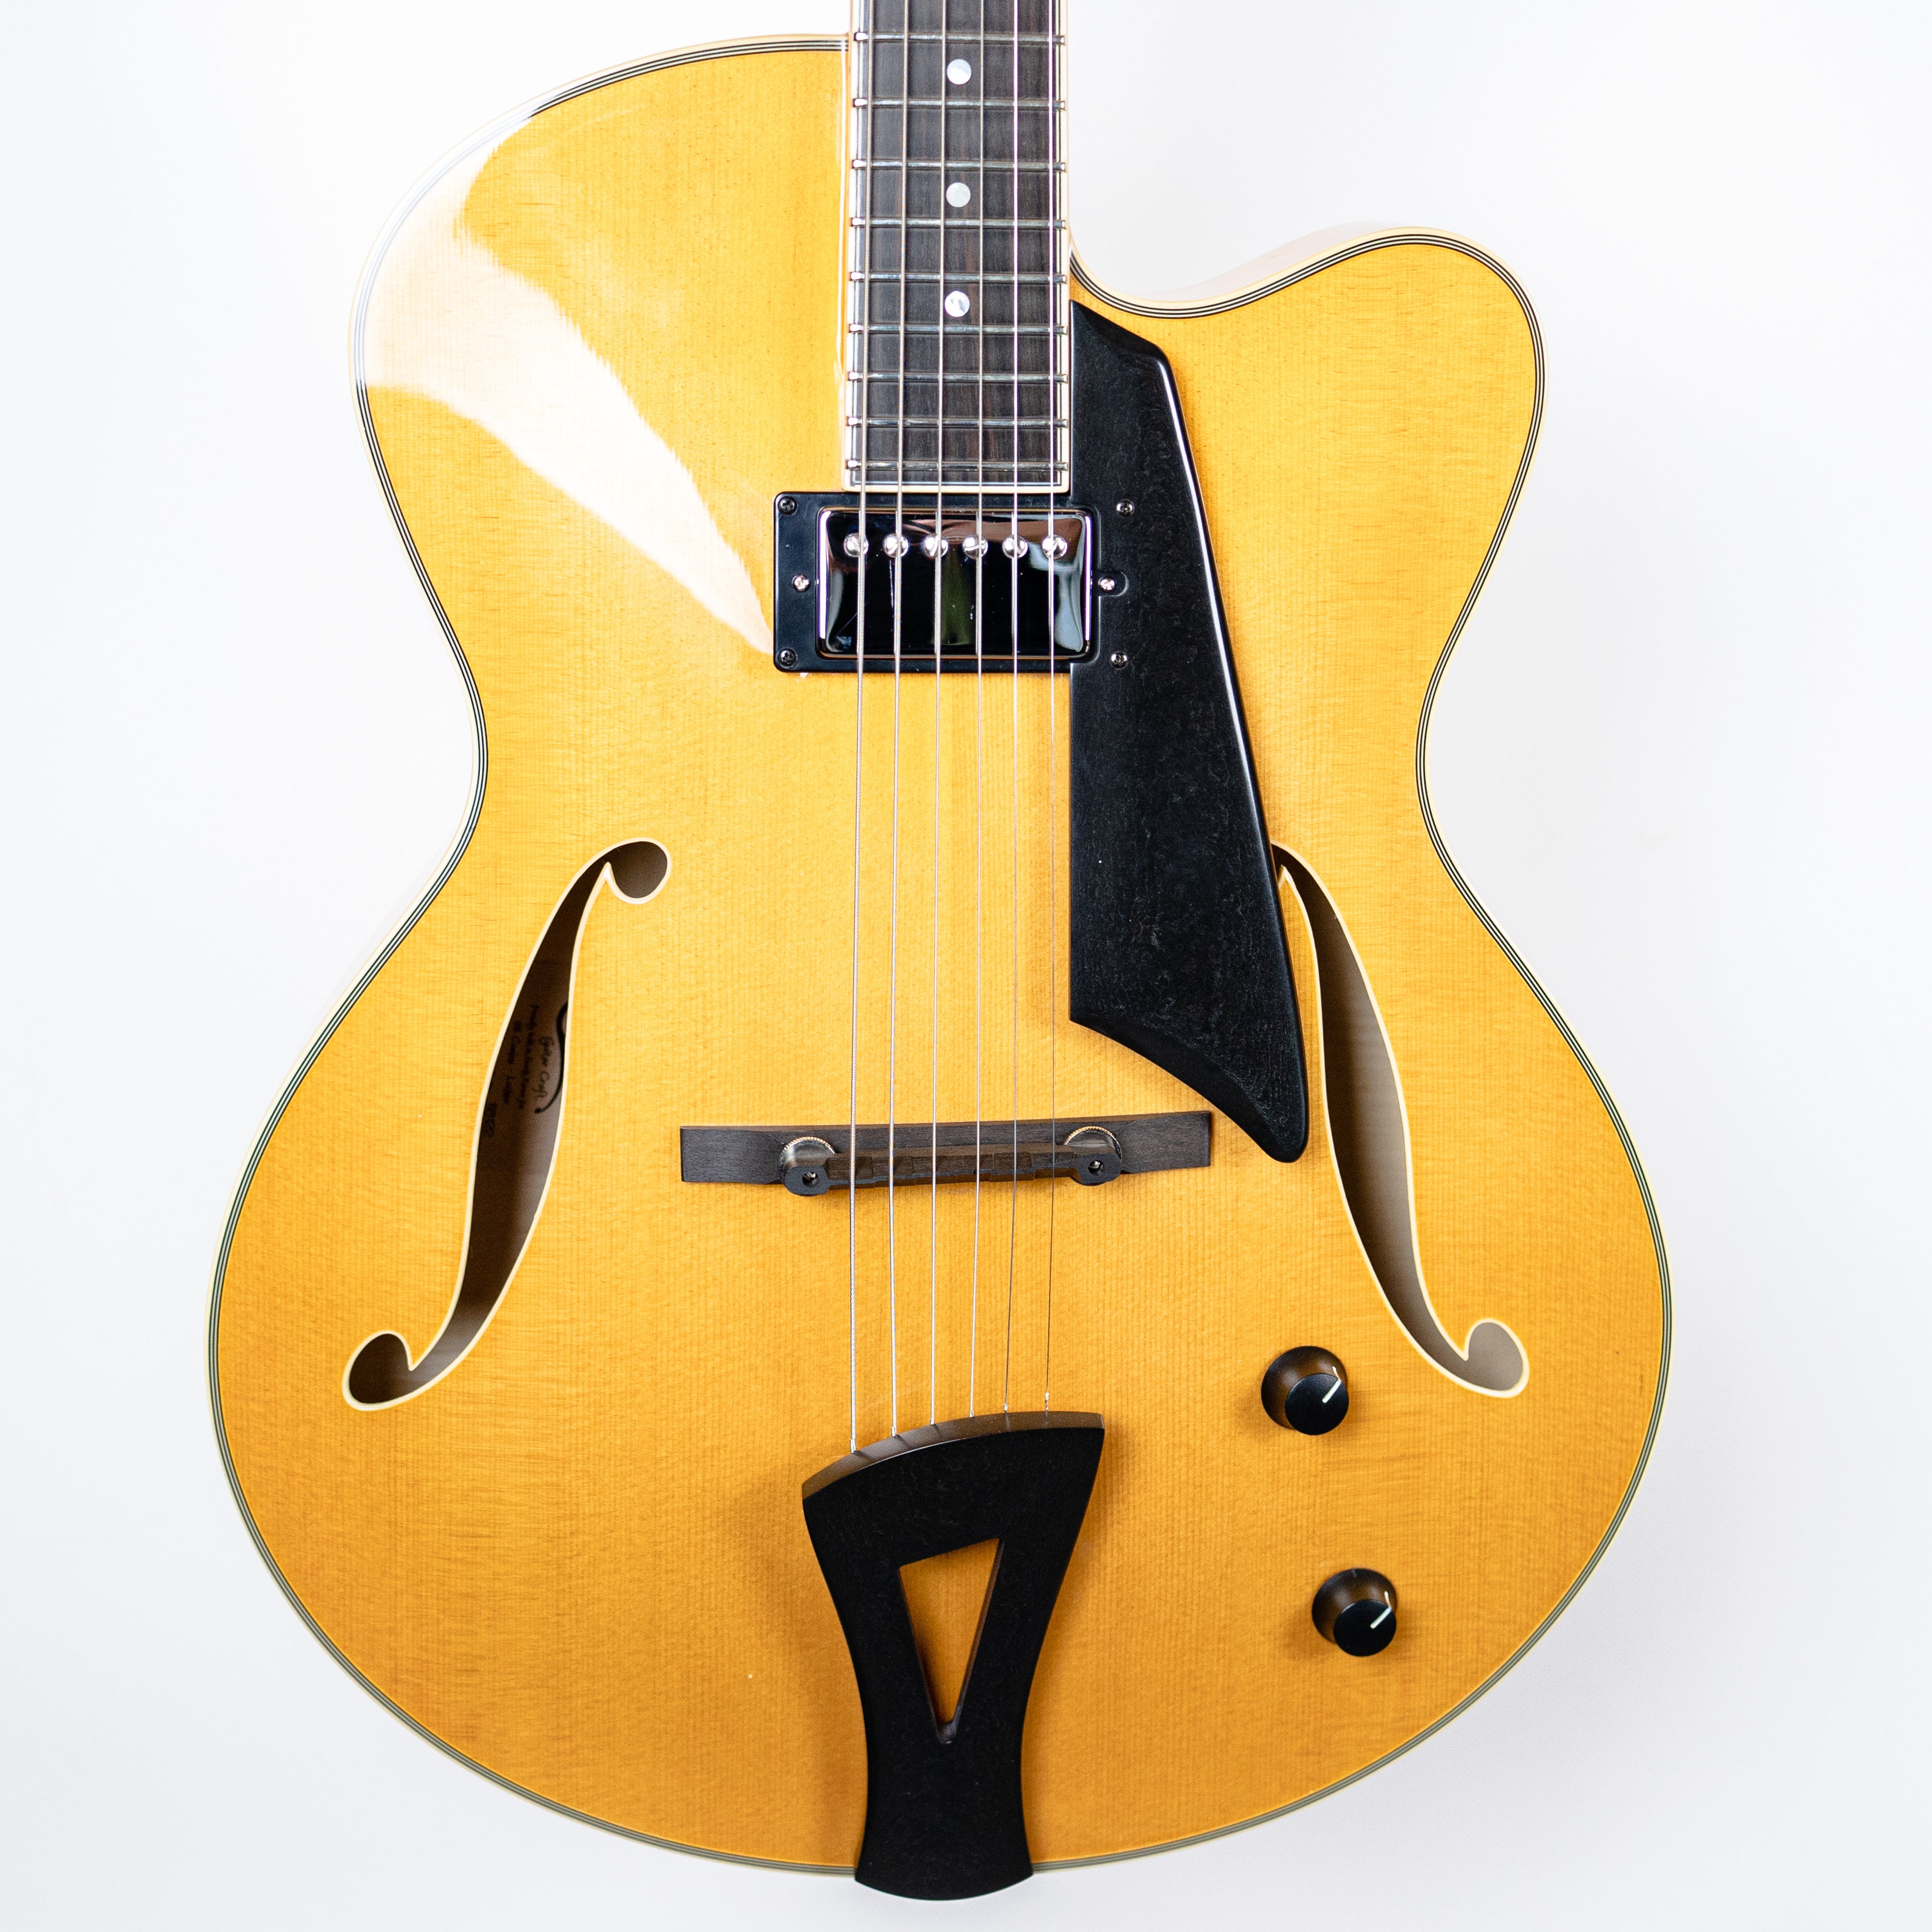 Comins GCS-16-1 Archtop in Blonde